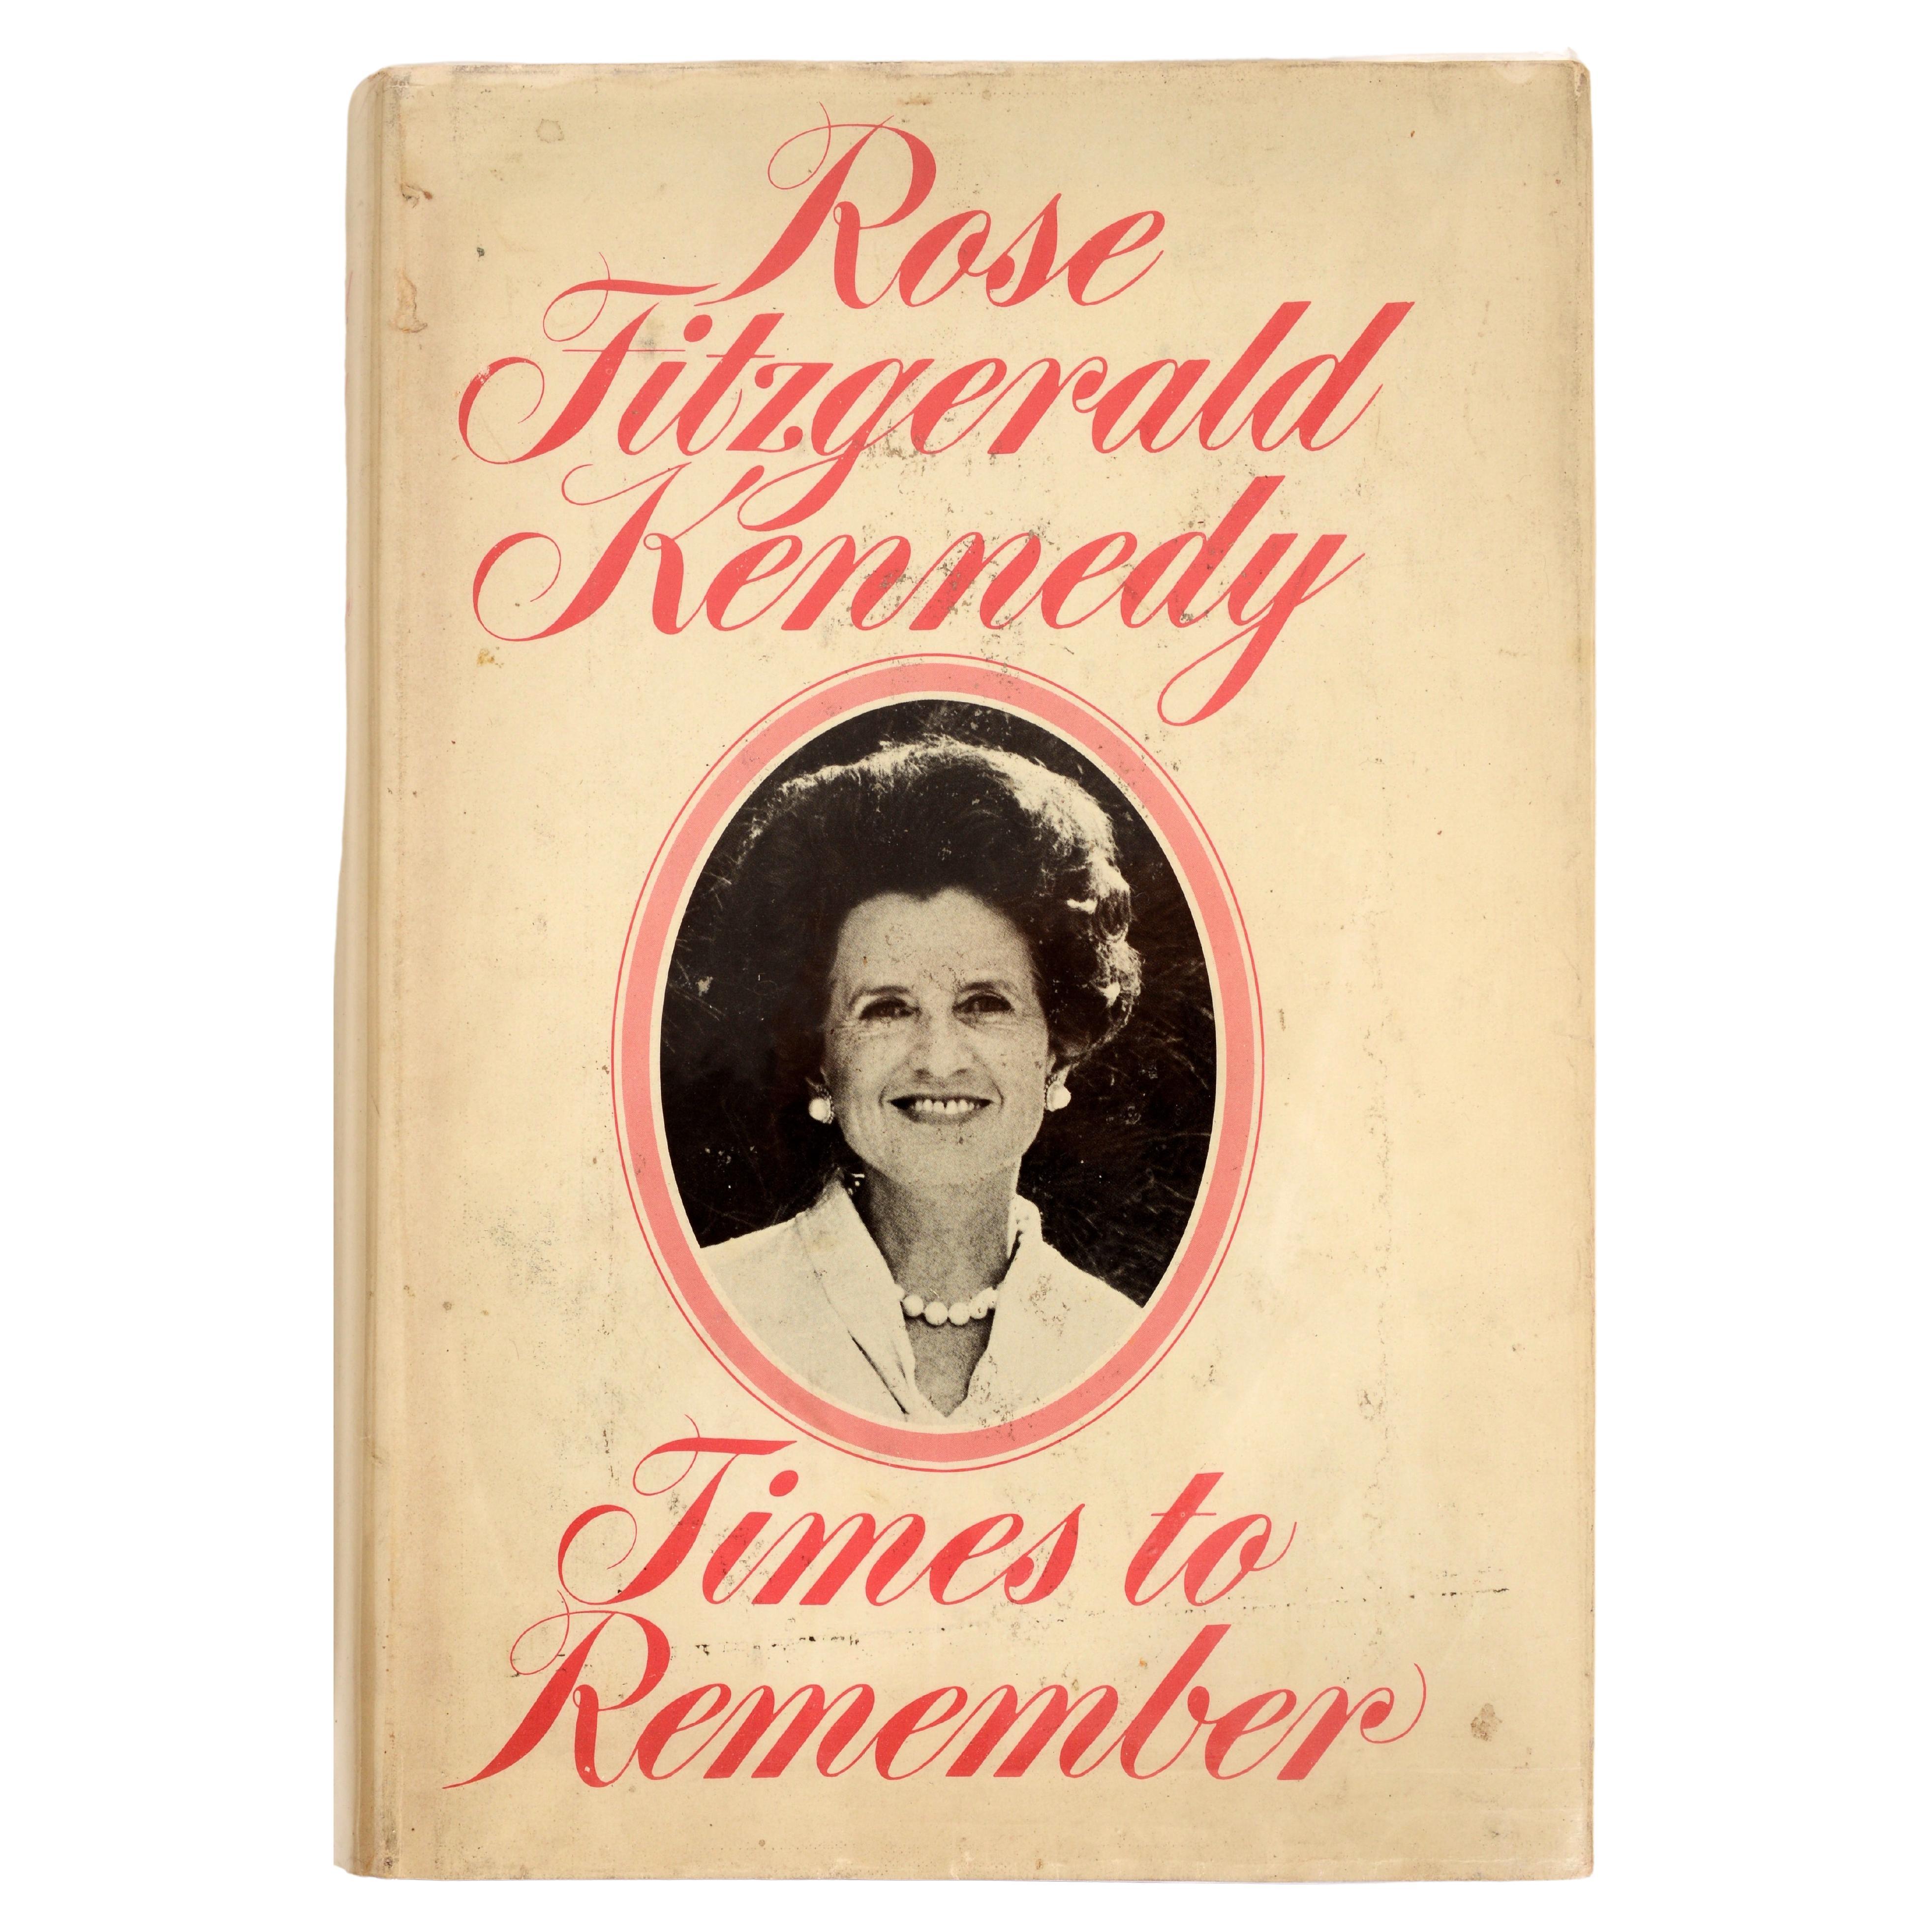 Times To Remember by Rose Fitzgerald Kennedy, Signed 1st Ed